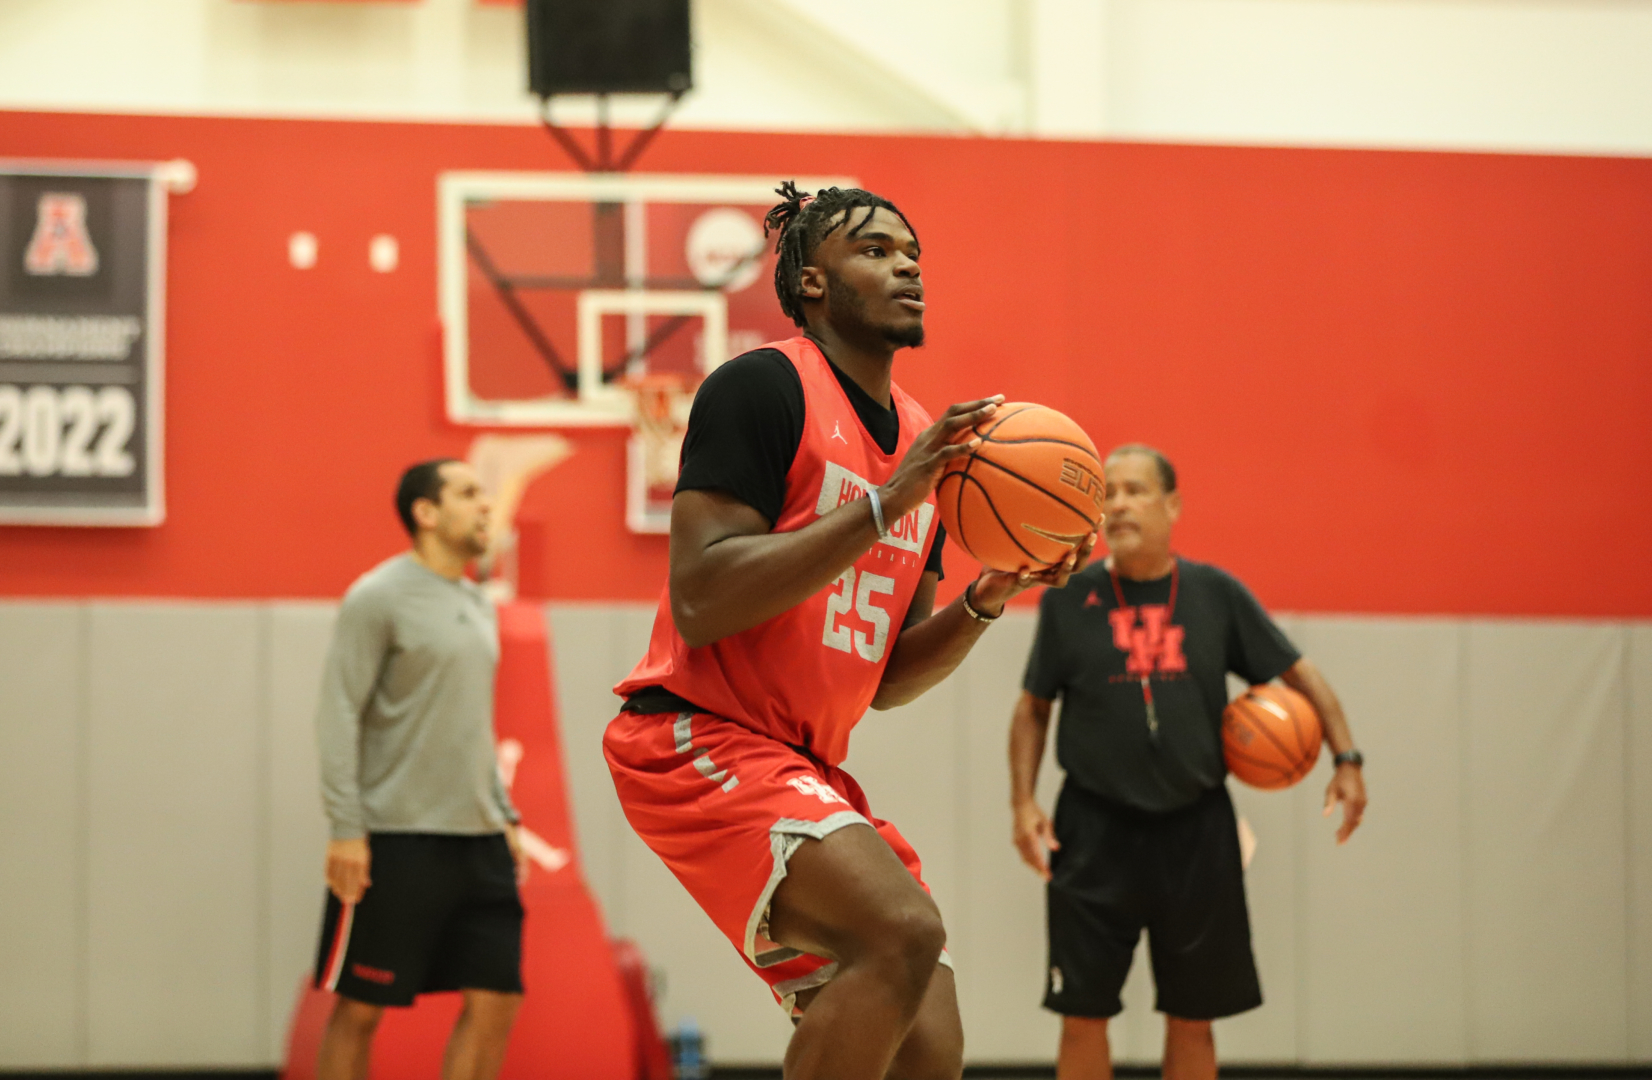 Many NBA Draft experts have projected UH freshman forward Jarace Walker to be a lottery pick in the 2023 draft. | Sean Thomas/The Cougar